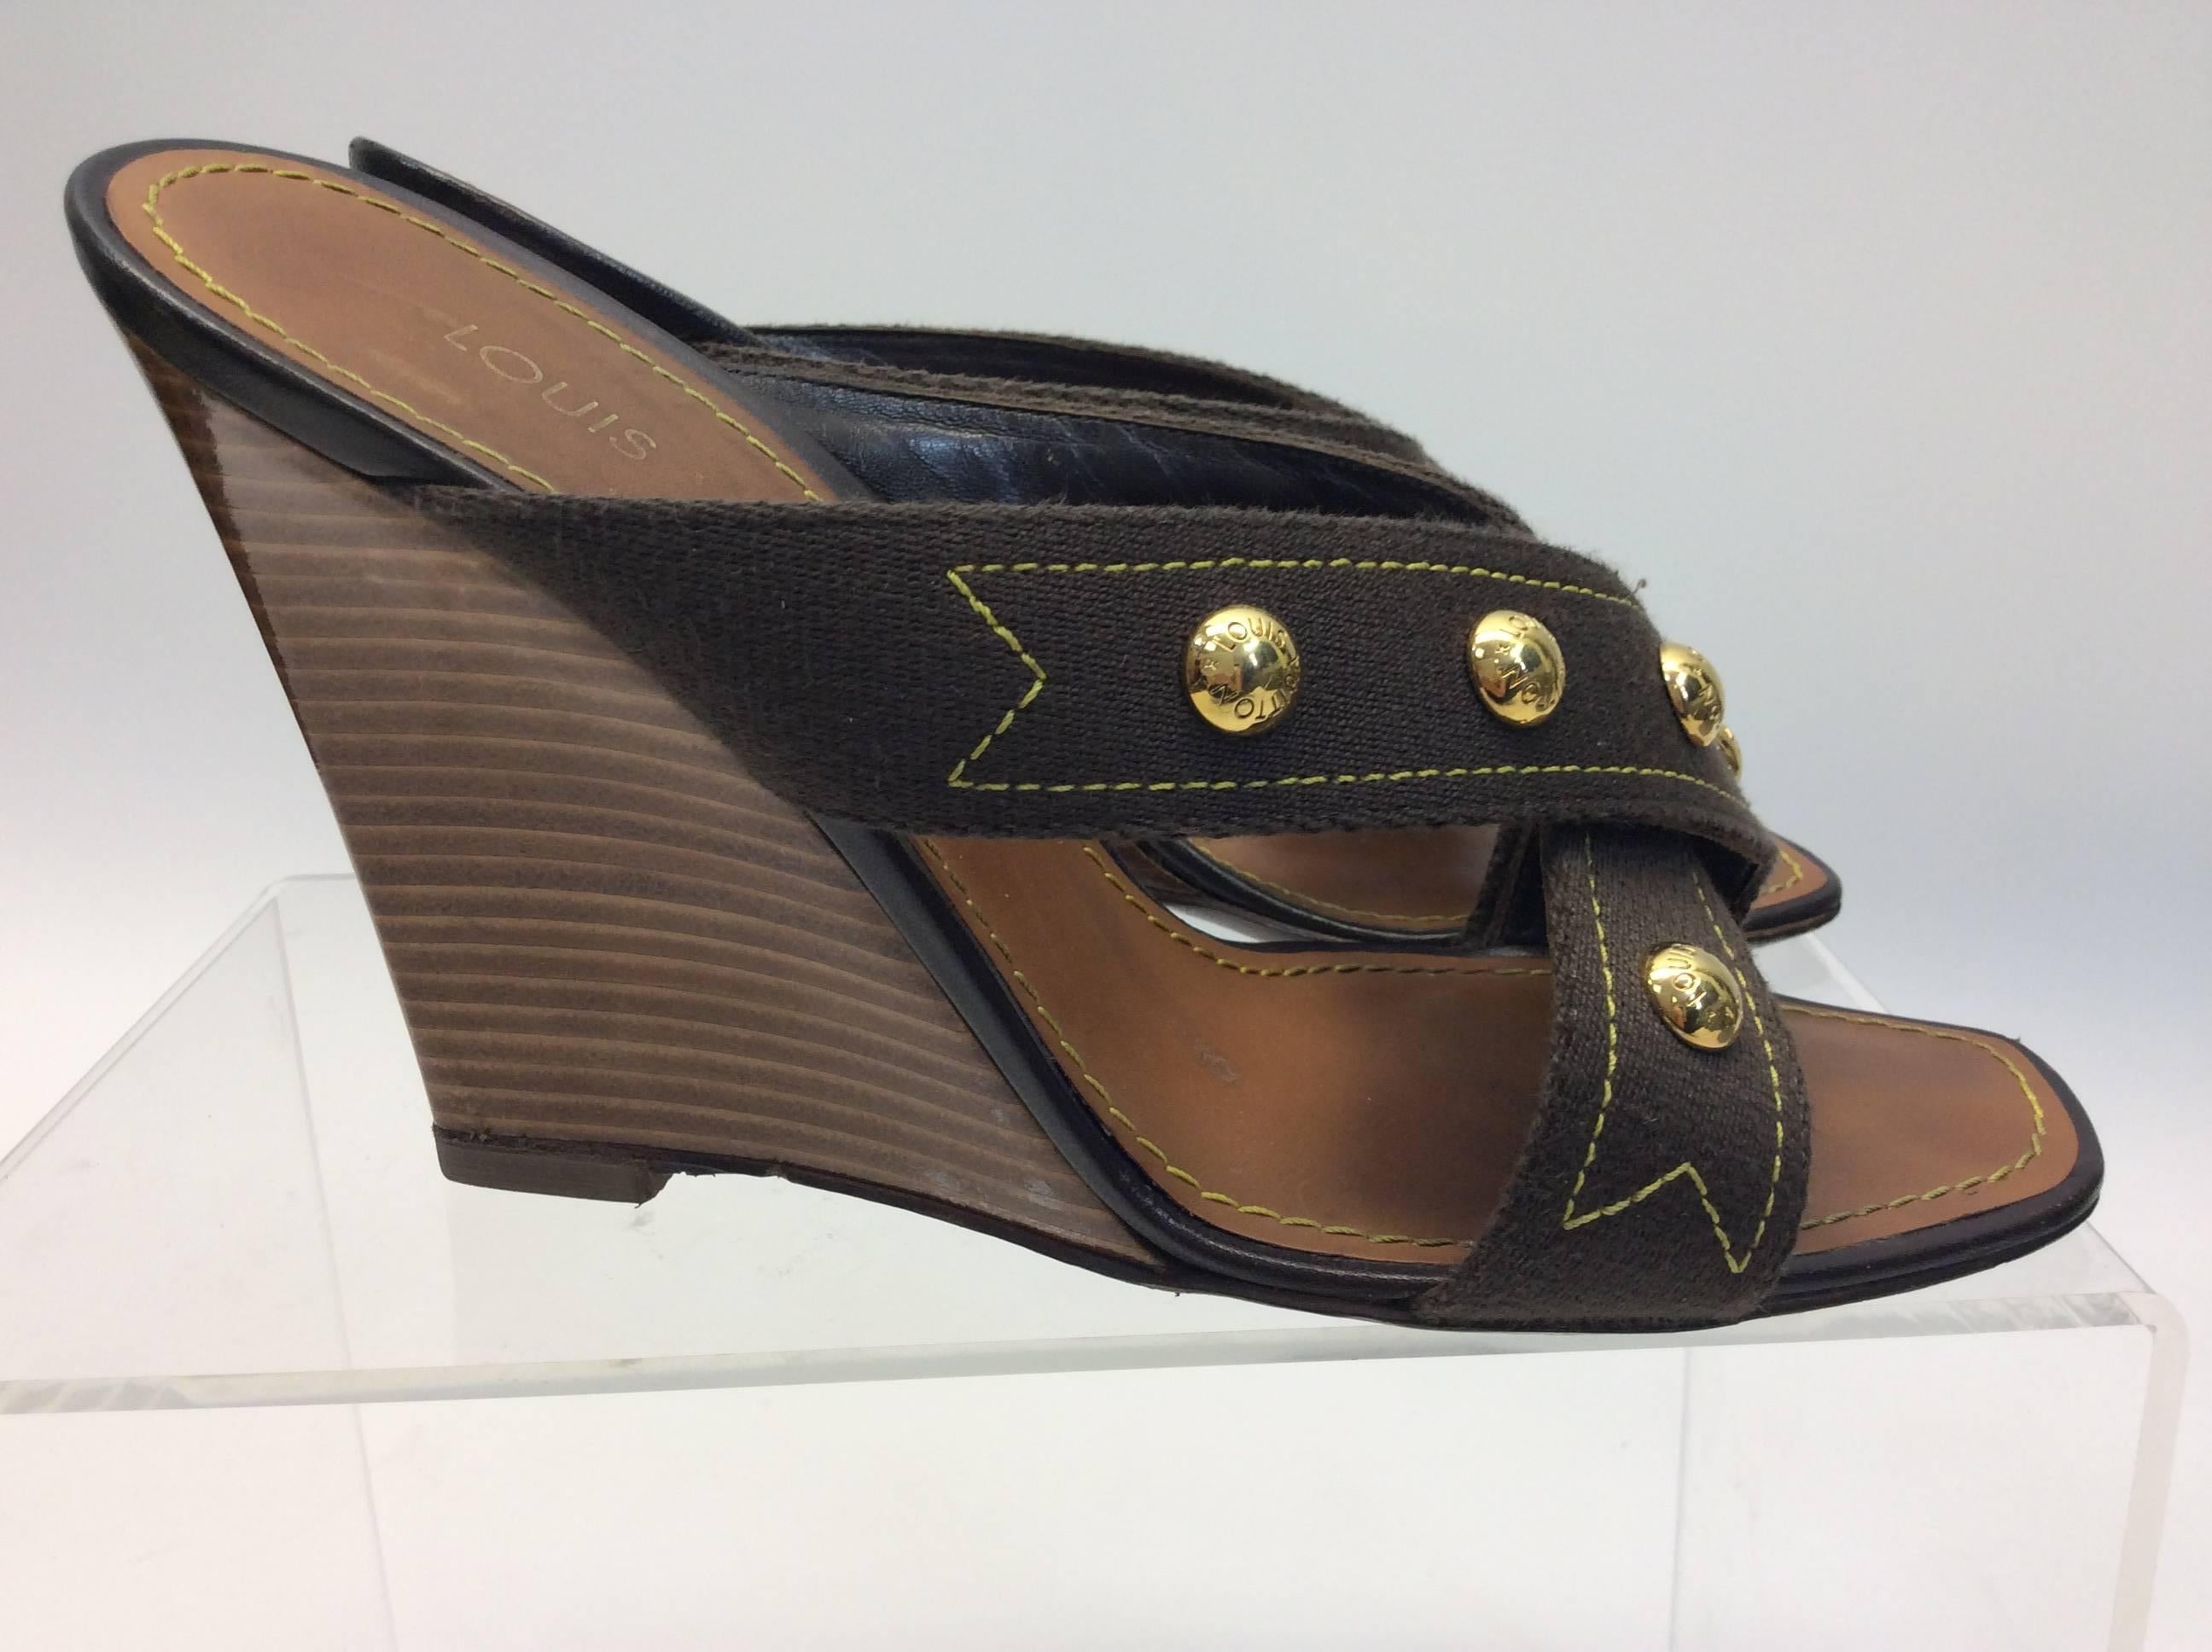 Louis Vuitton Brown Studded Leather Wedge In Excellent Condition For Sale In Narberth, PA